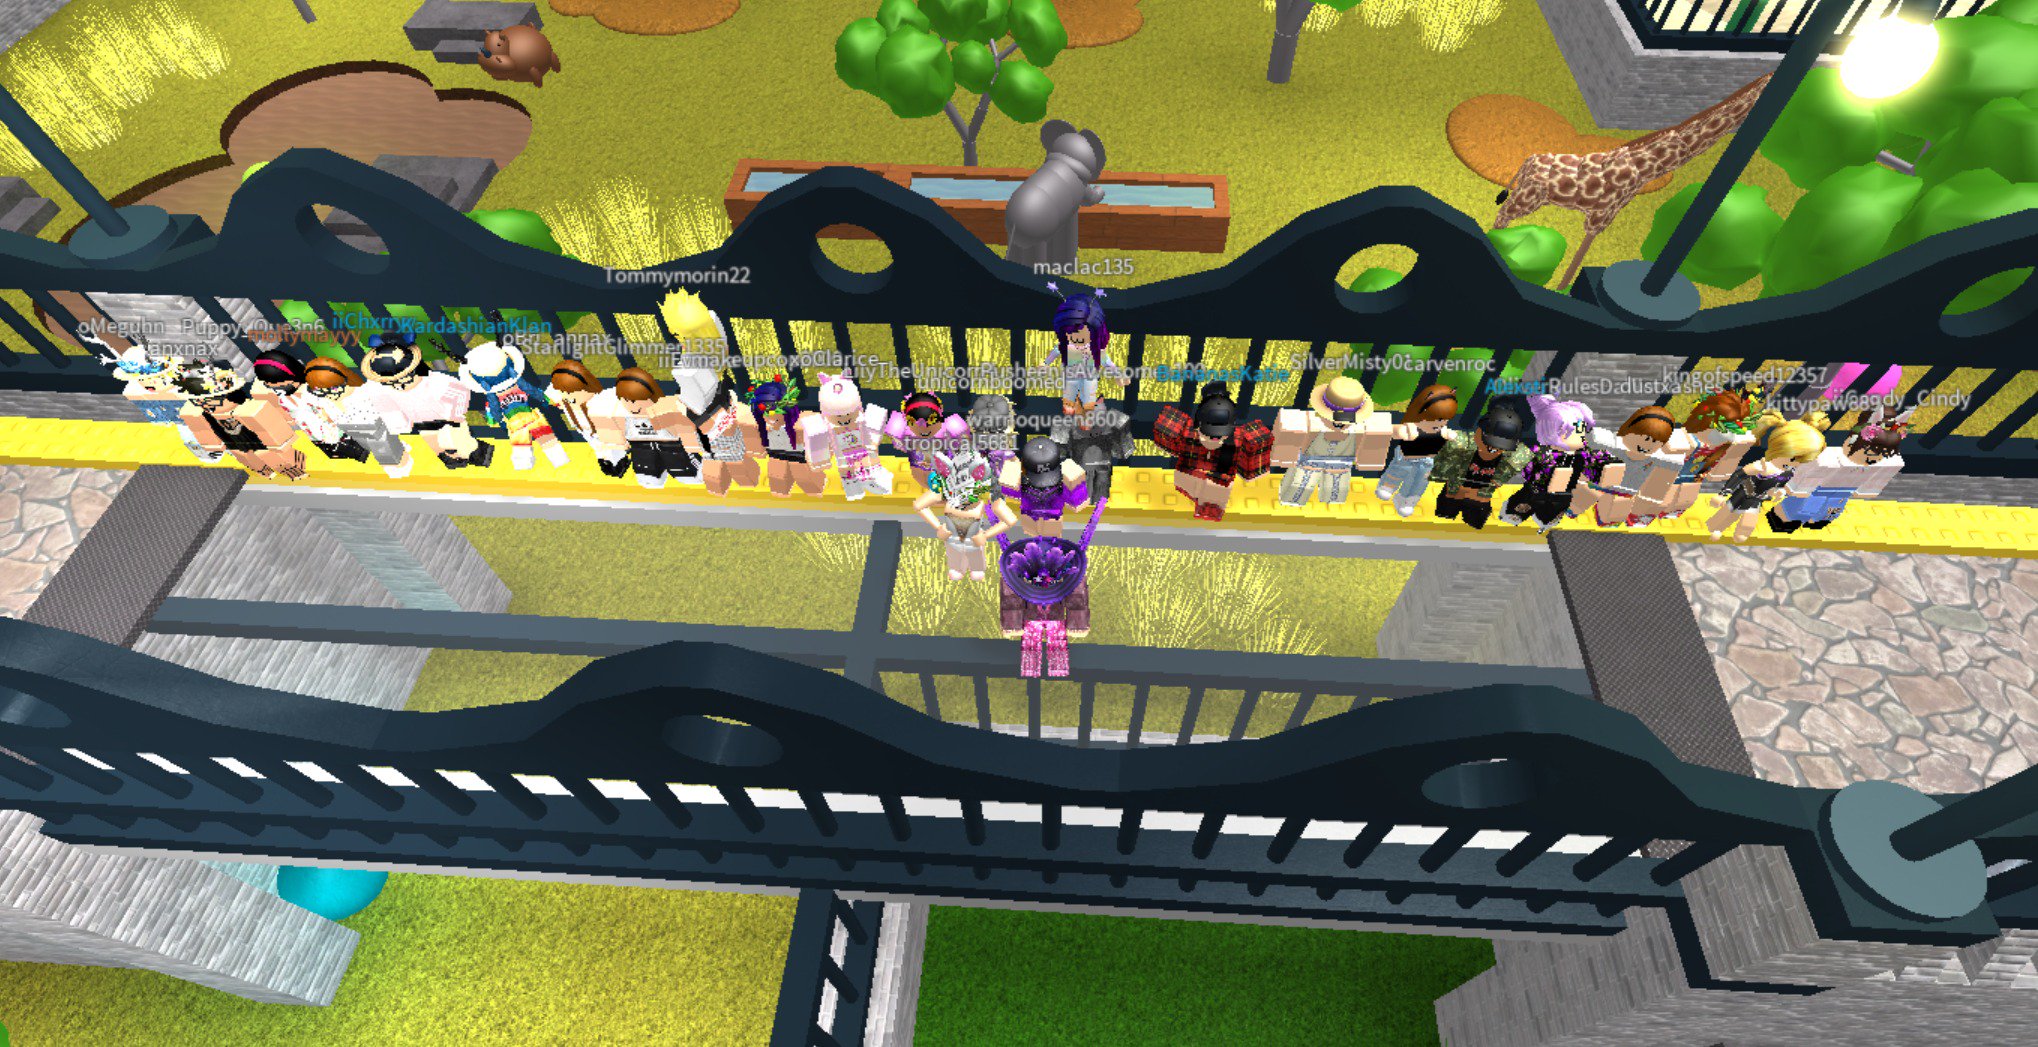 Mimi Dev On Twitter Had A Fun Trip To The Robloxia Zoo With Everyone Thanks For Playing With Me No I Couldn T Fix The Morphs Today It S More Than A 2 Minute Job - roblox robloxia zoo